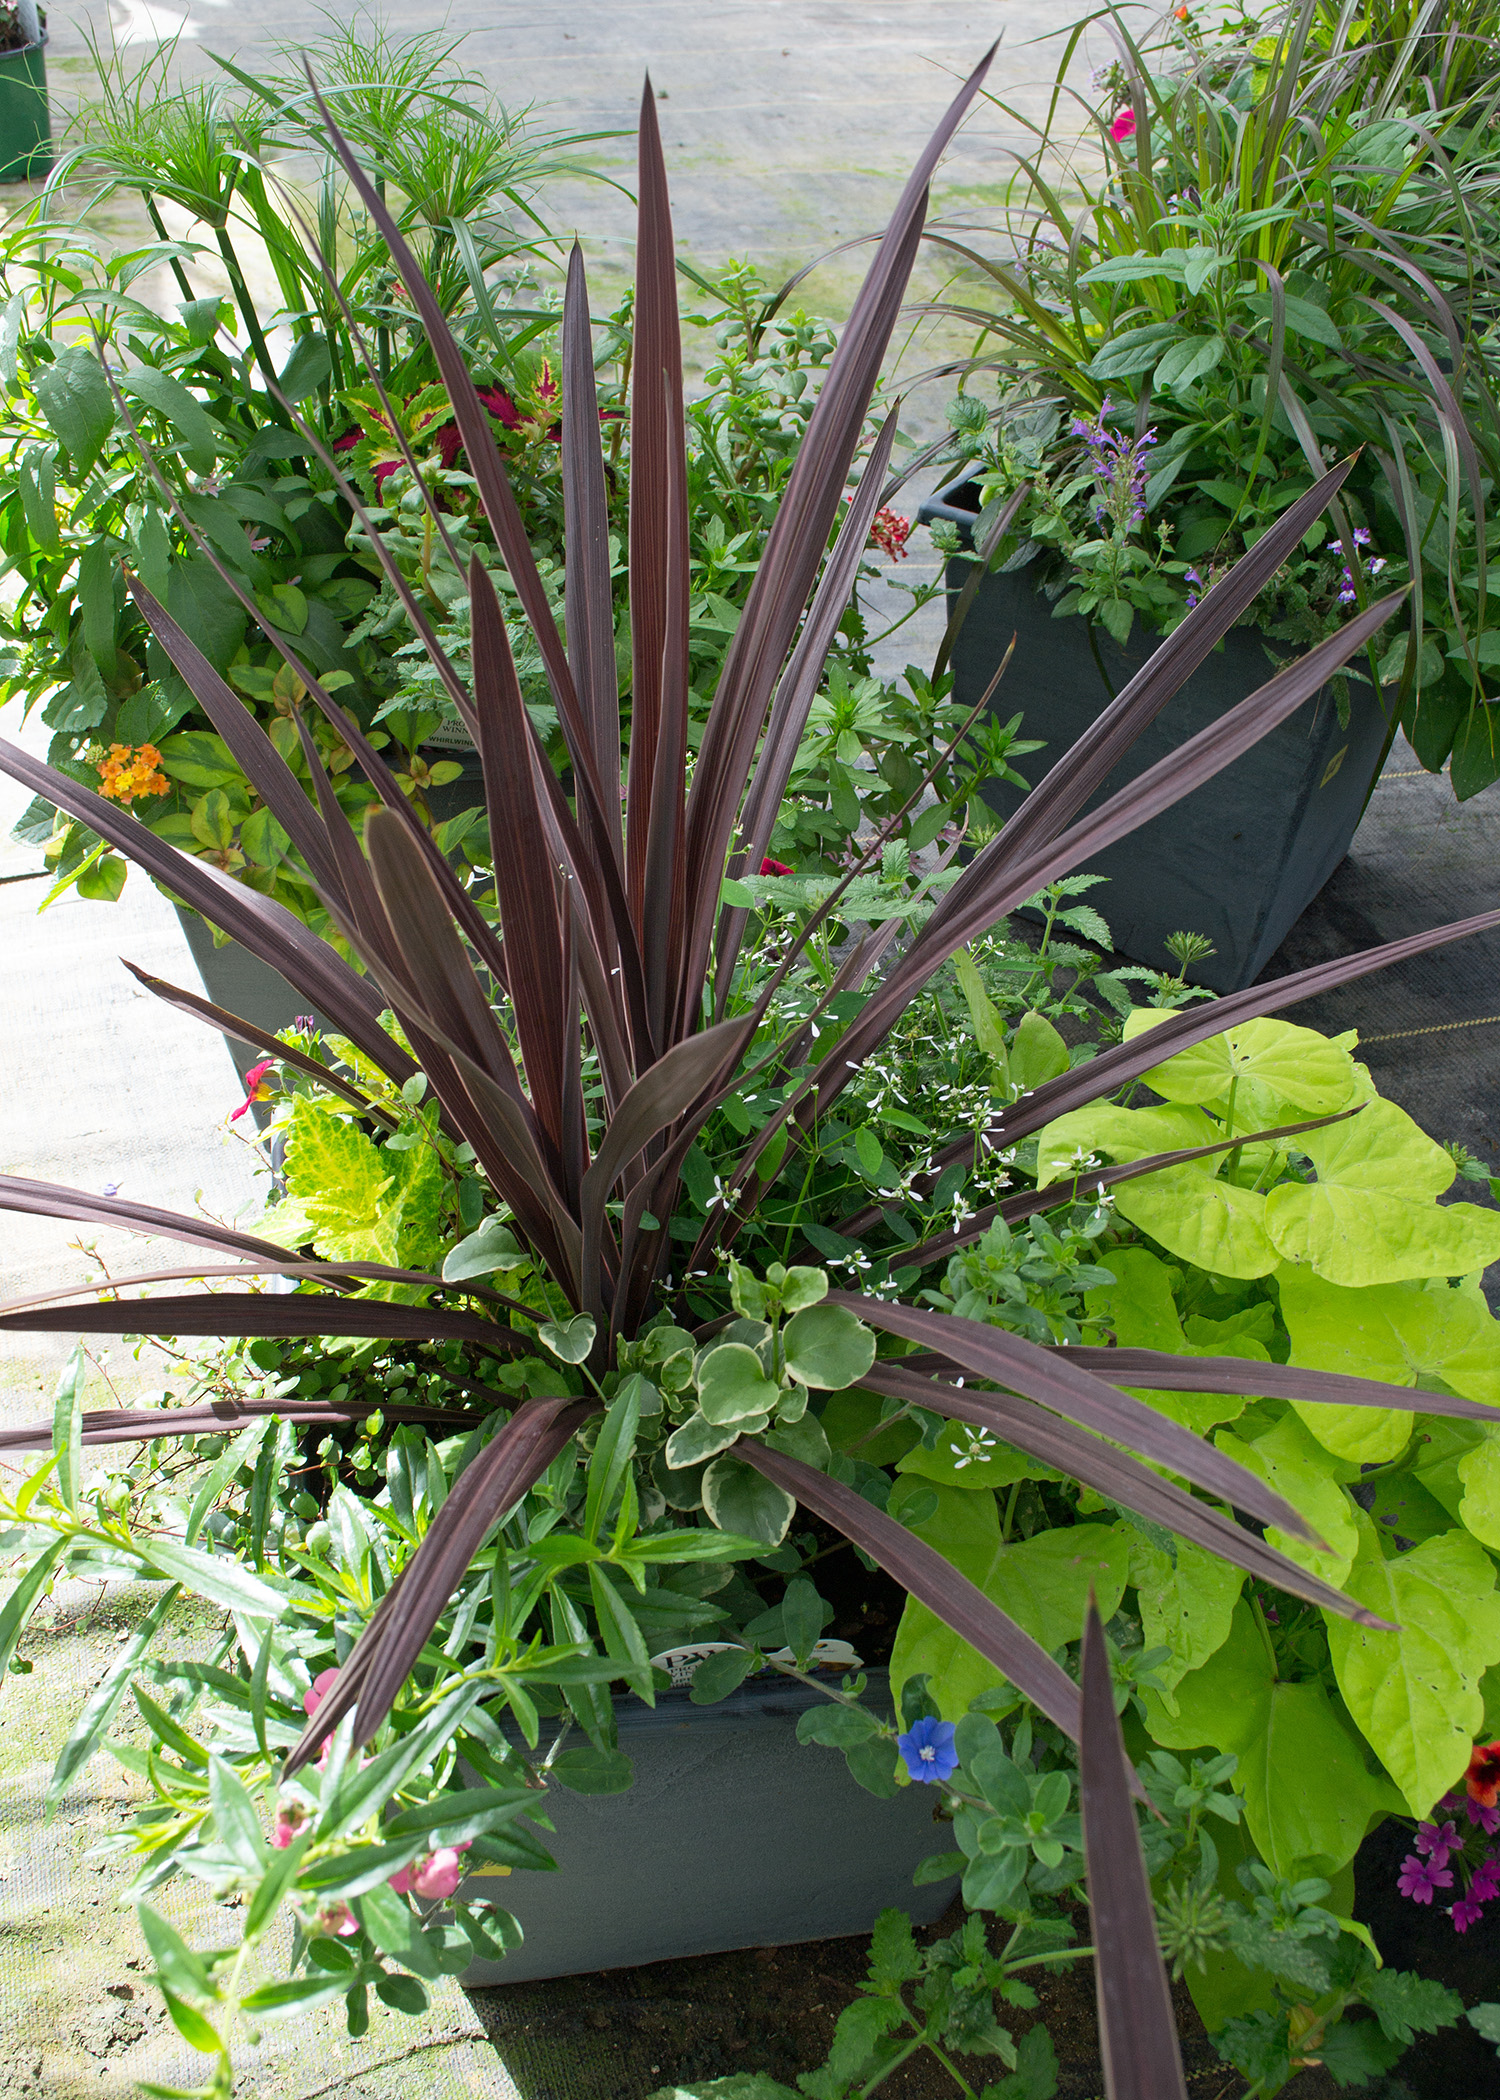 Thriller, spiller, filler: how to plant up containers successfully